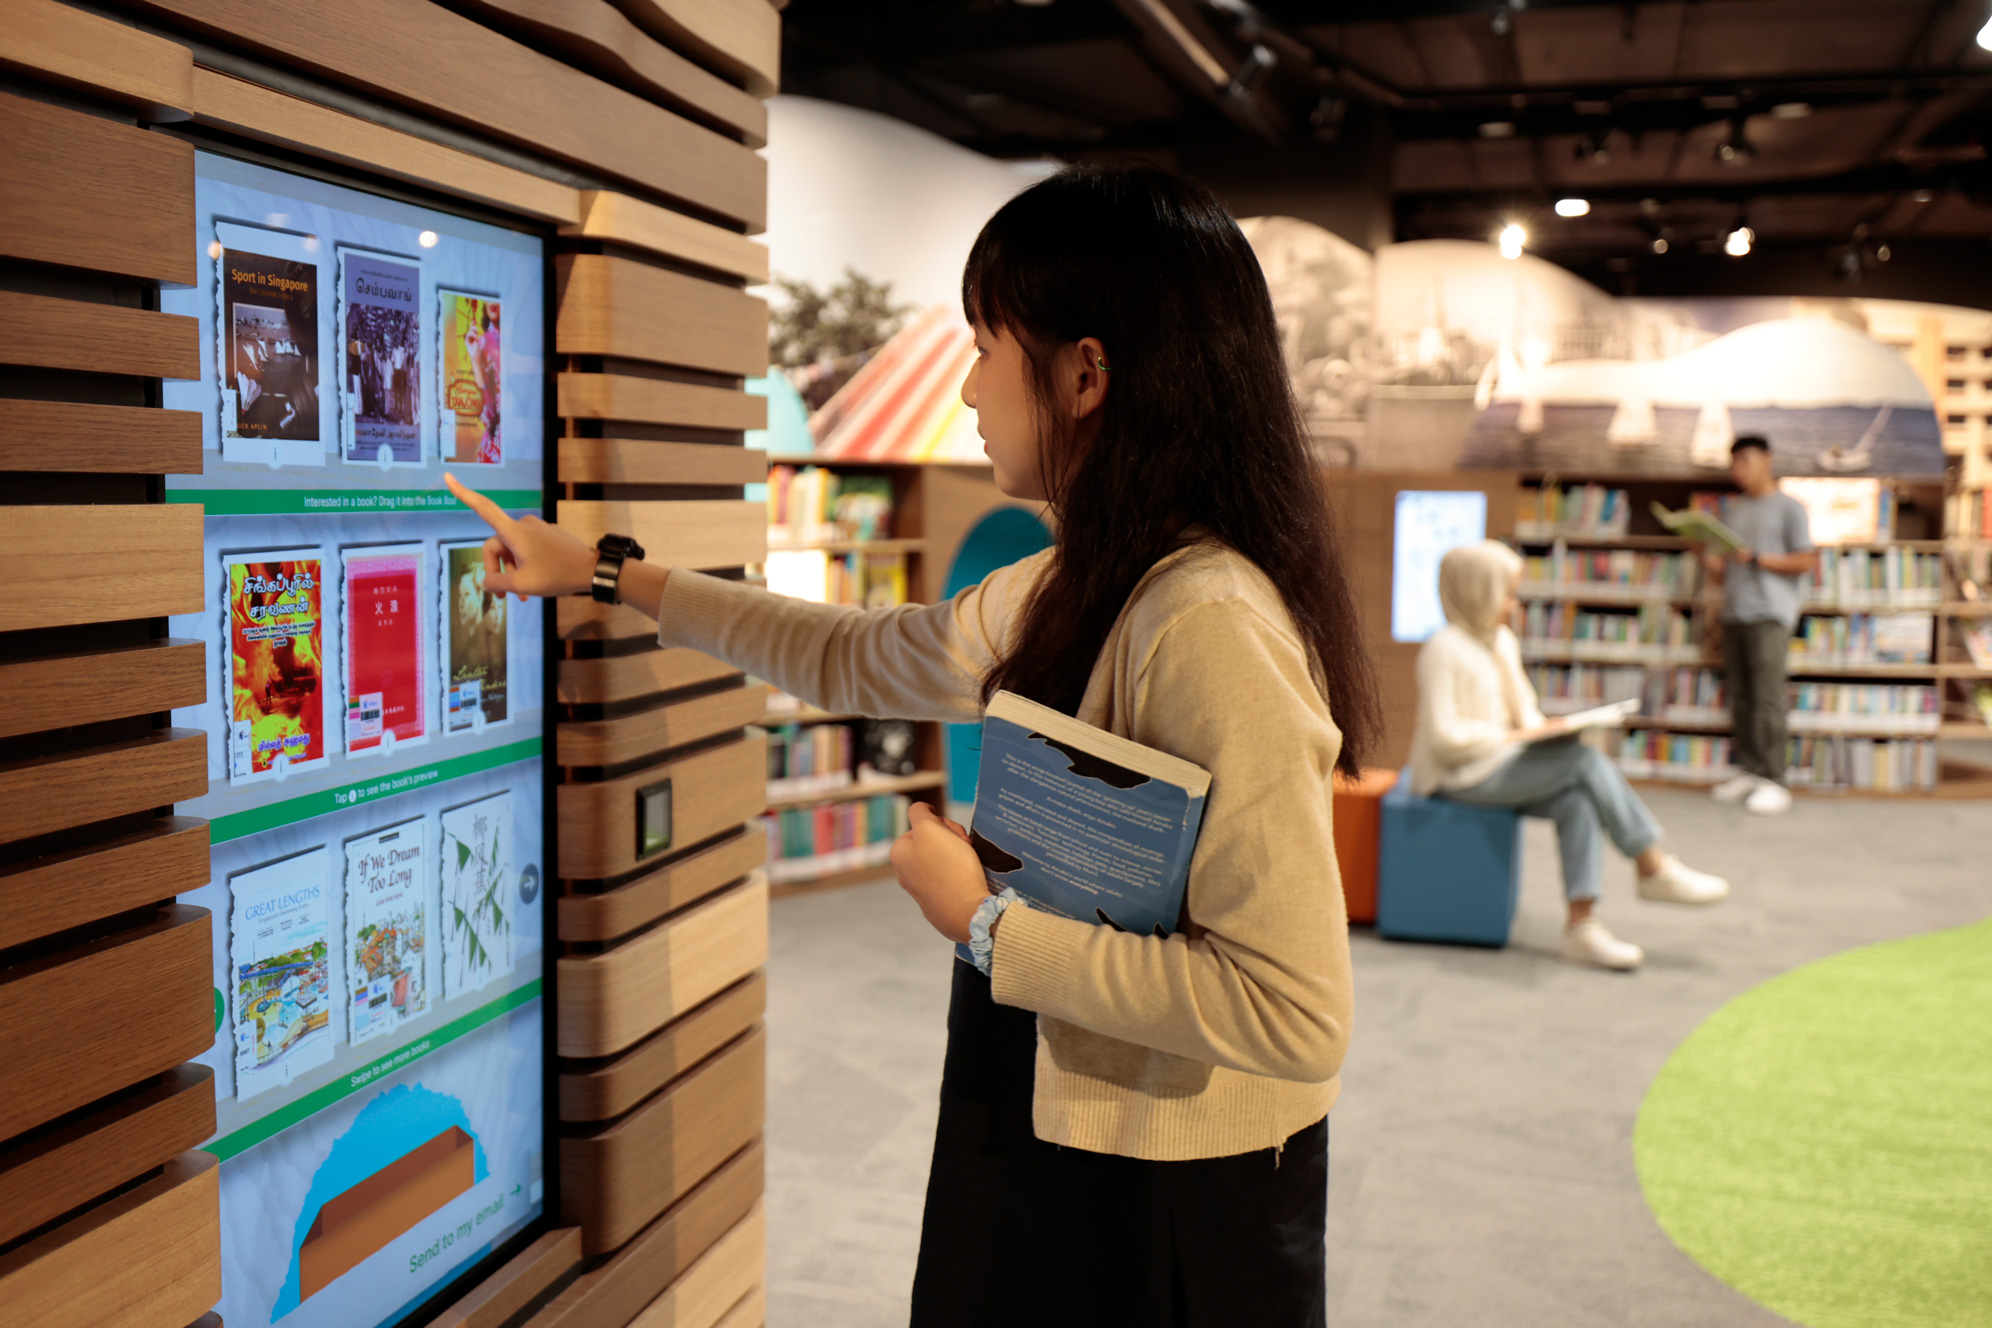 A photo of SG alcove space, a patron is trying out the book recommendation interactive kiosk